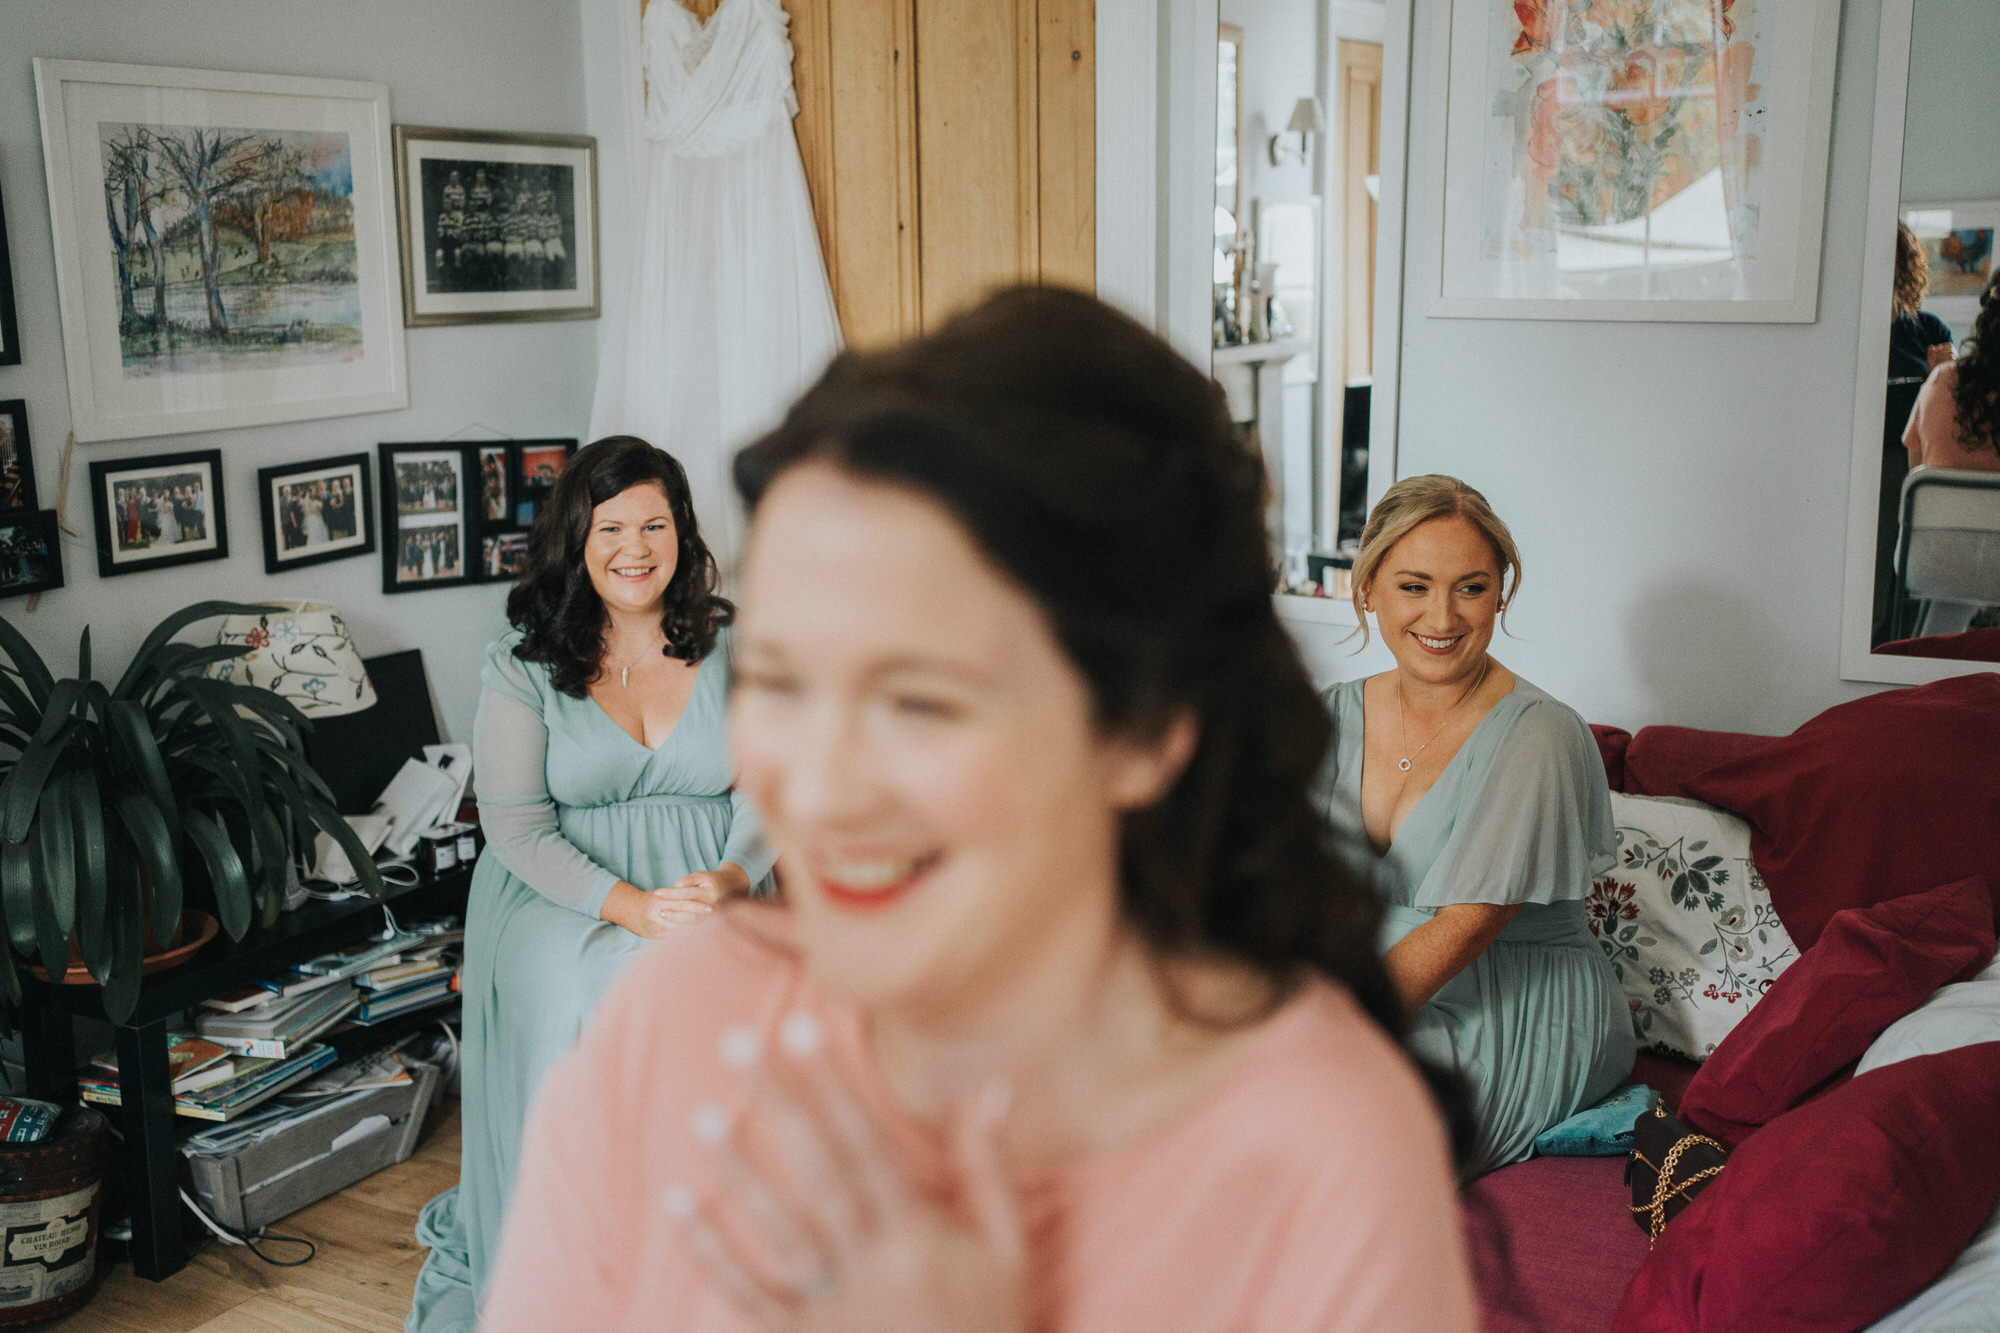 Two bridesmaids sit behind the bride and smiles